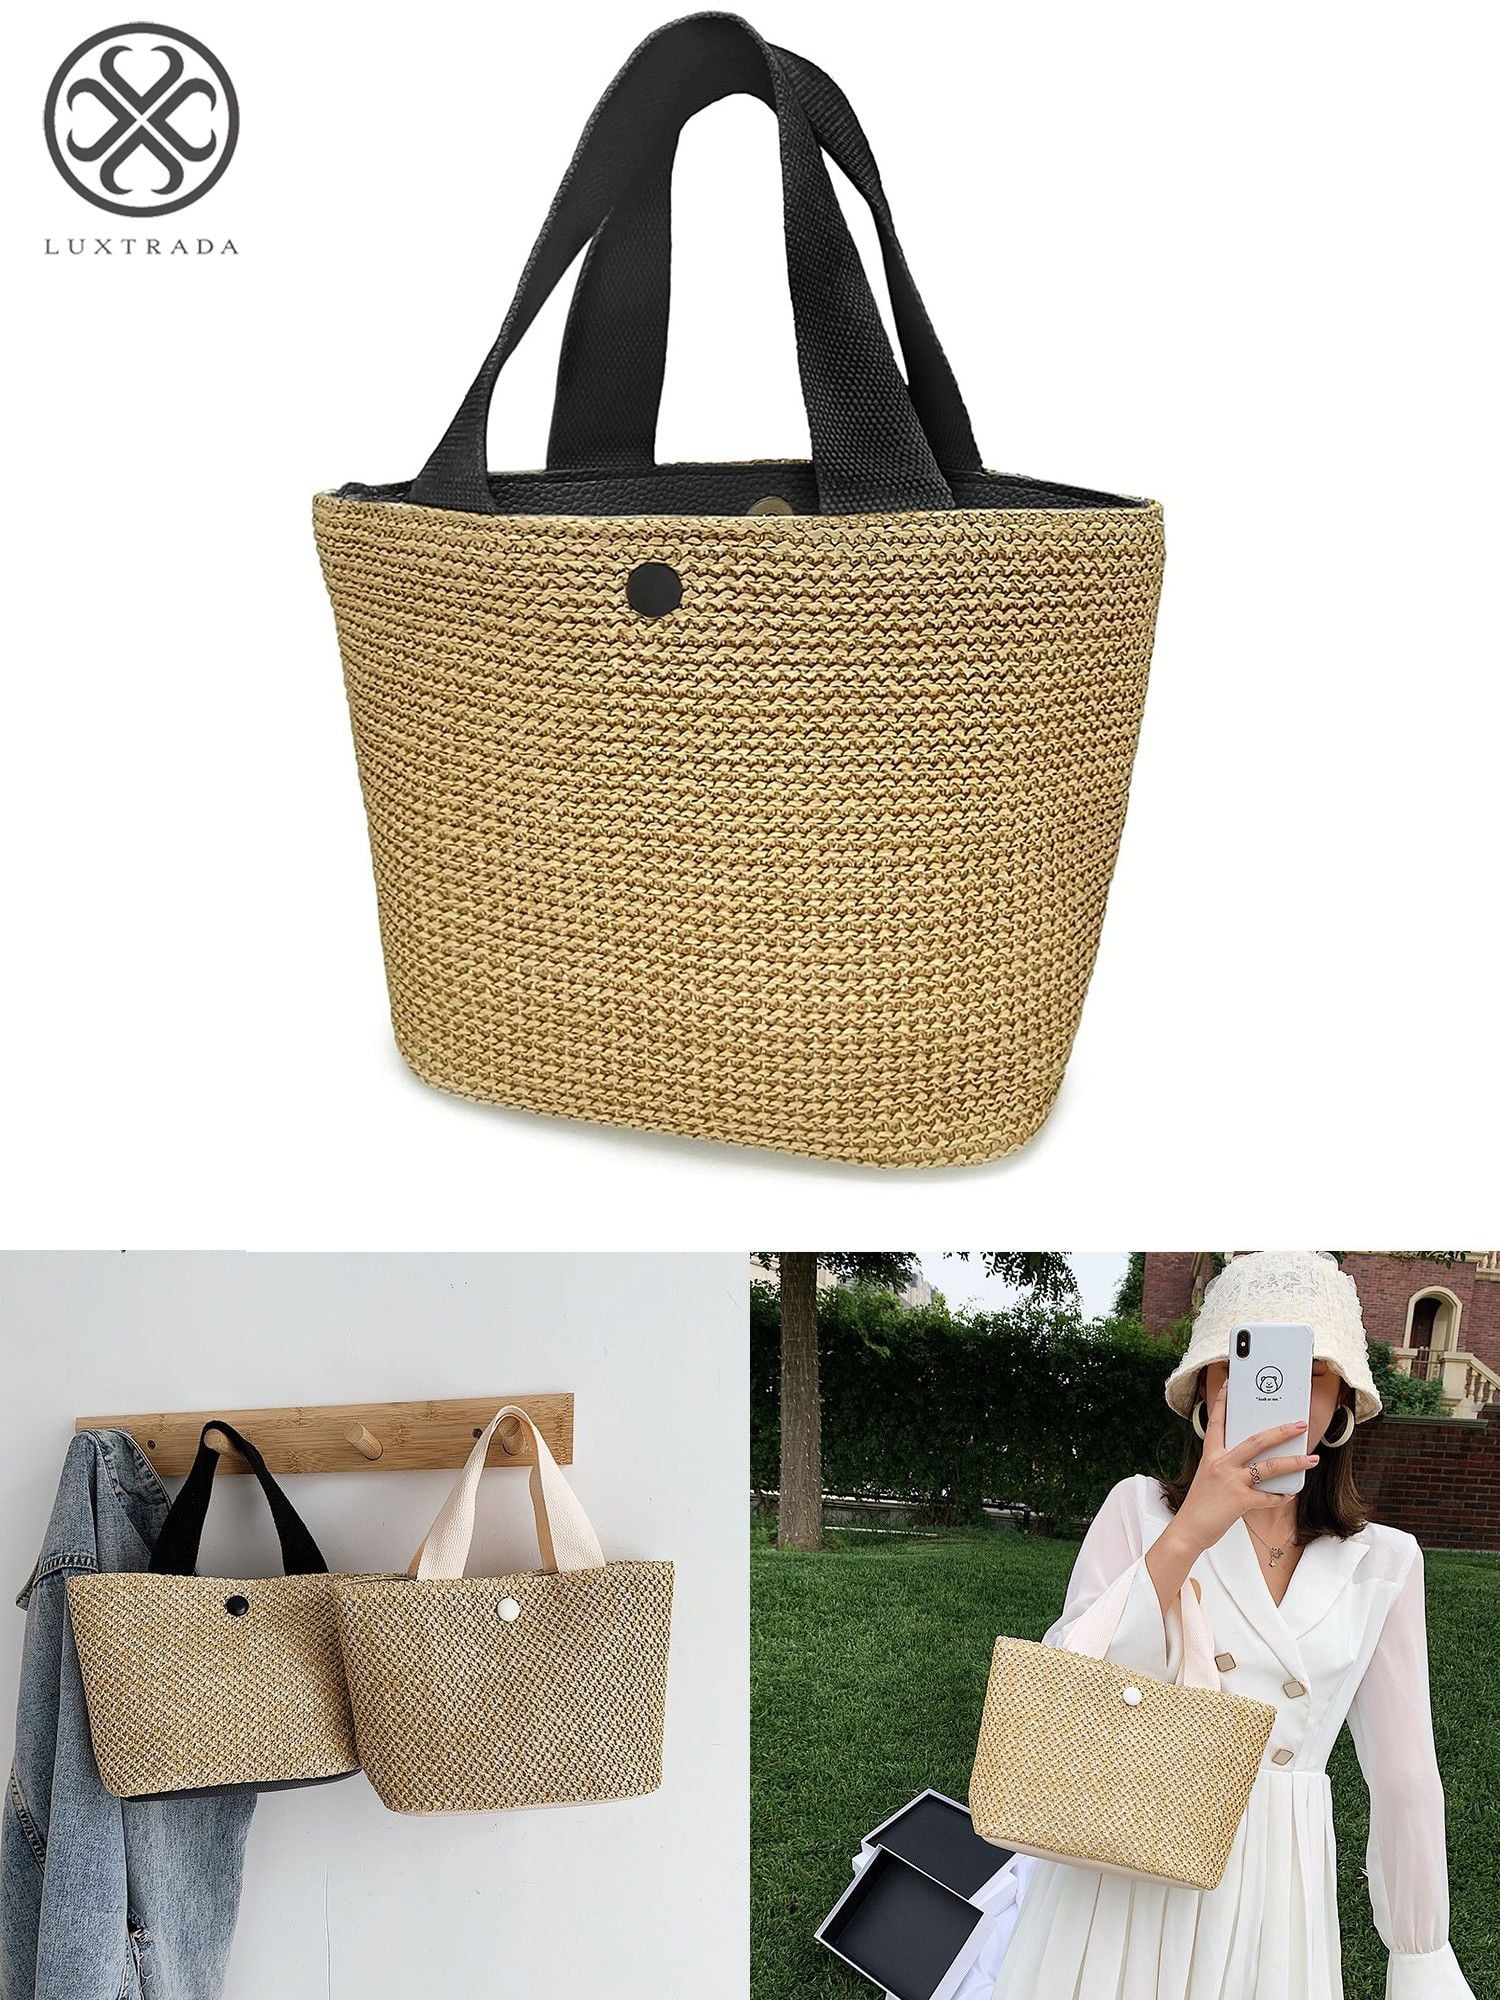 Luxtrada Straw Bags for Women Tote with Handles Boho Beach Tote Bag ...